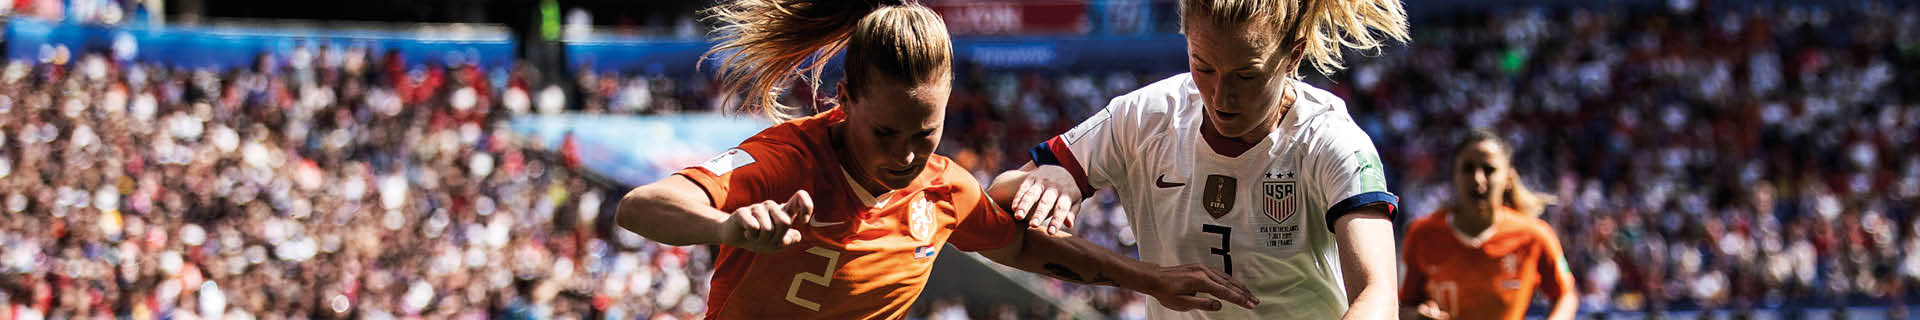 Threat Monitoring for FIFA’s 2019 Women's World Cup